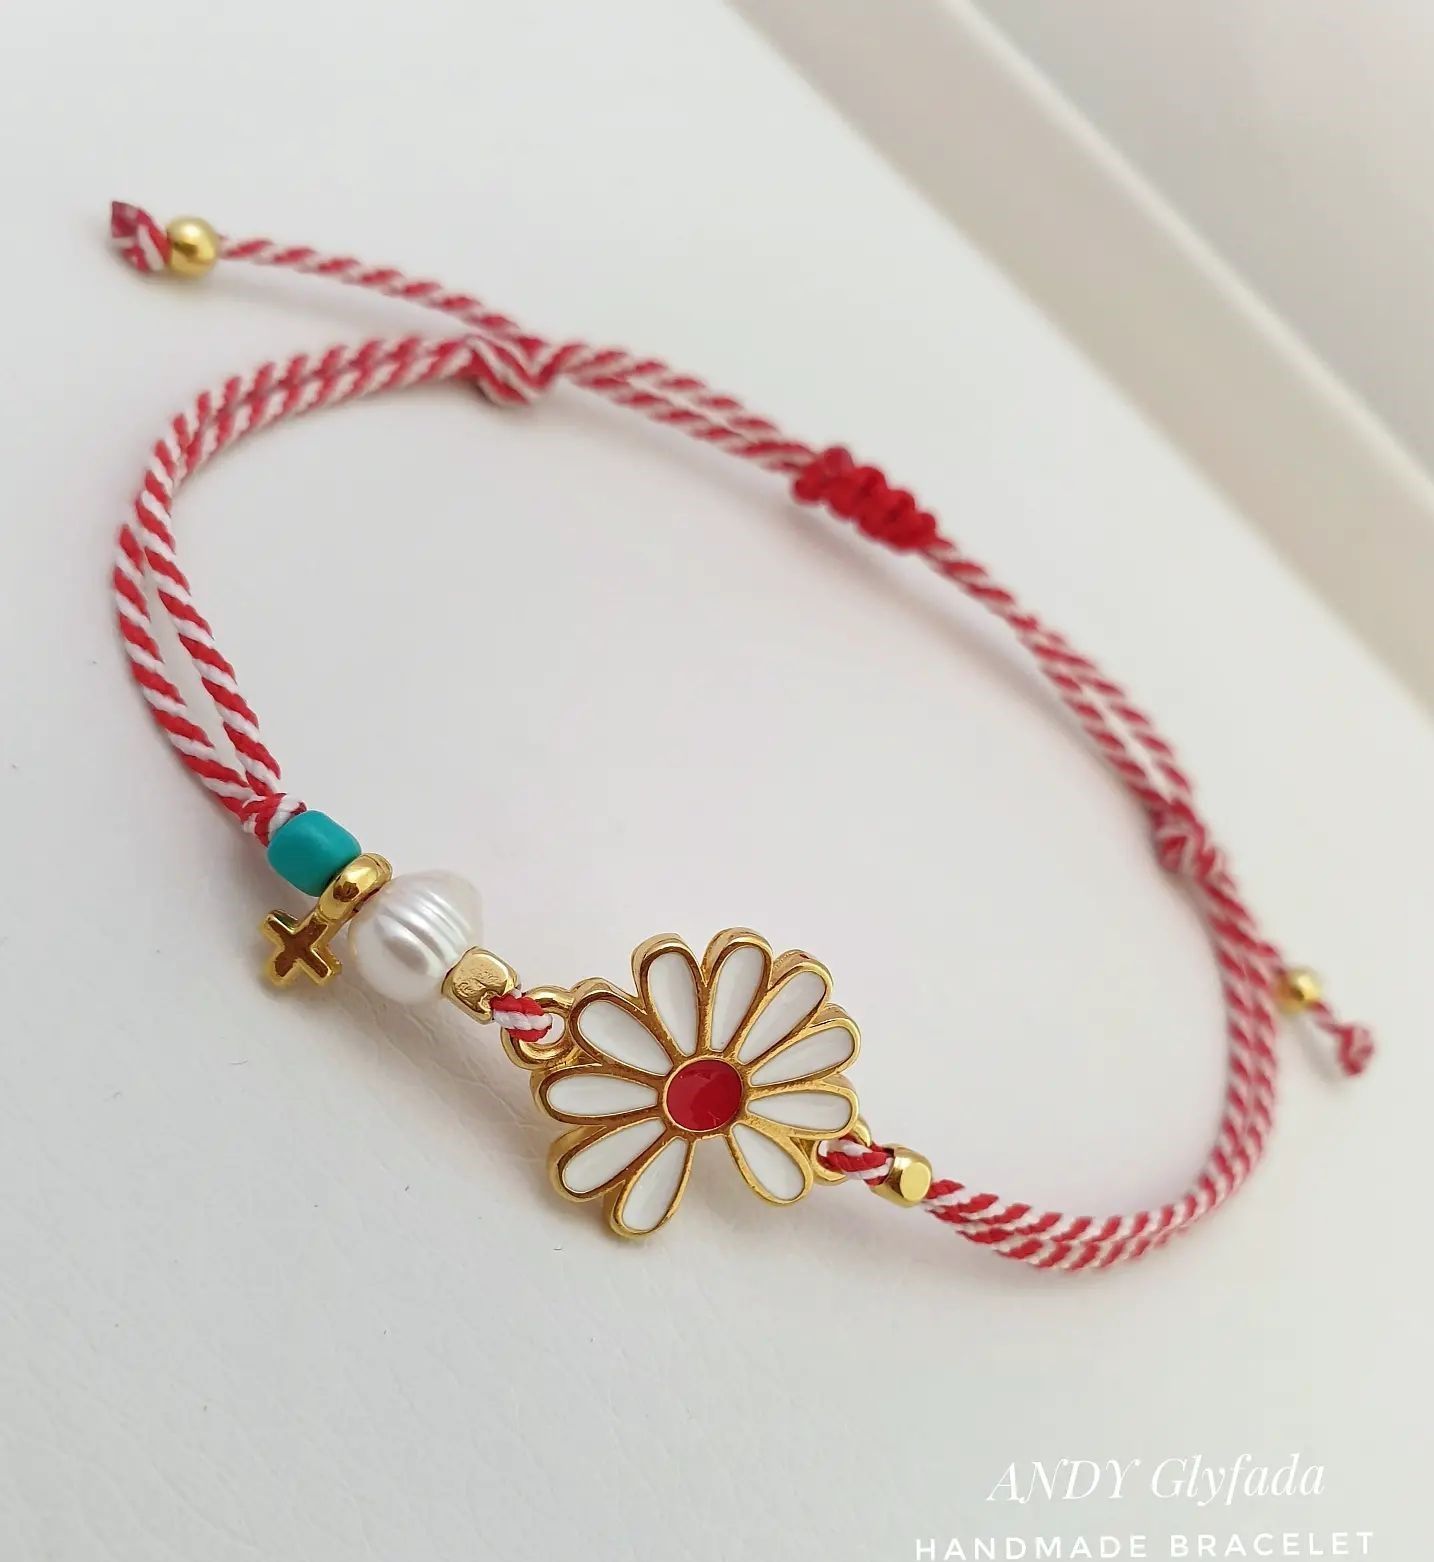 Handmade March Bracelet Daisy with Enamel - Pearl and Turquoise Bead in Macrame Cotton Cord